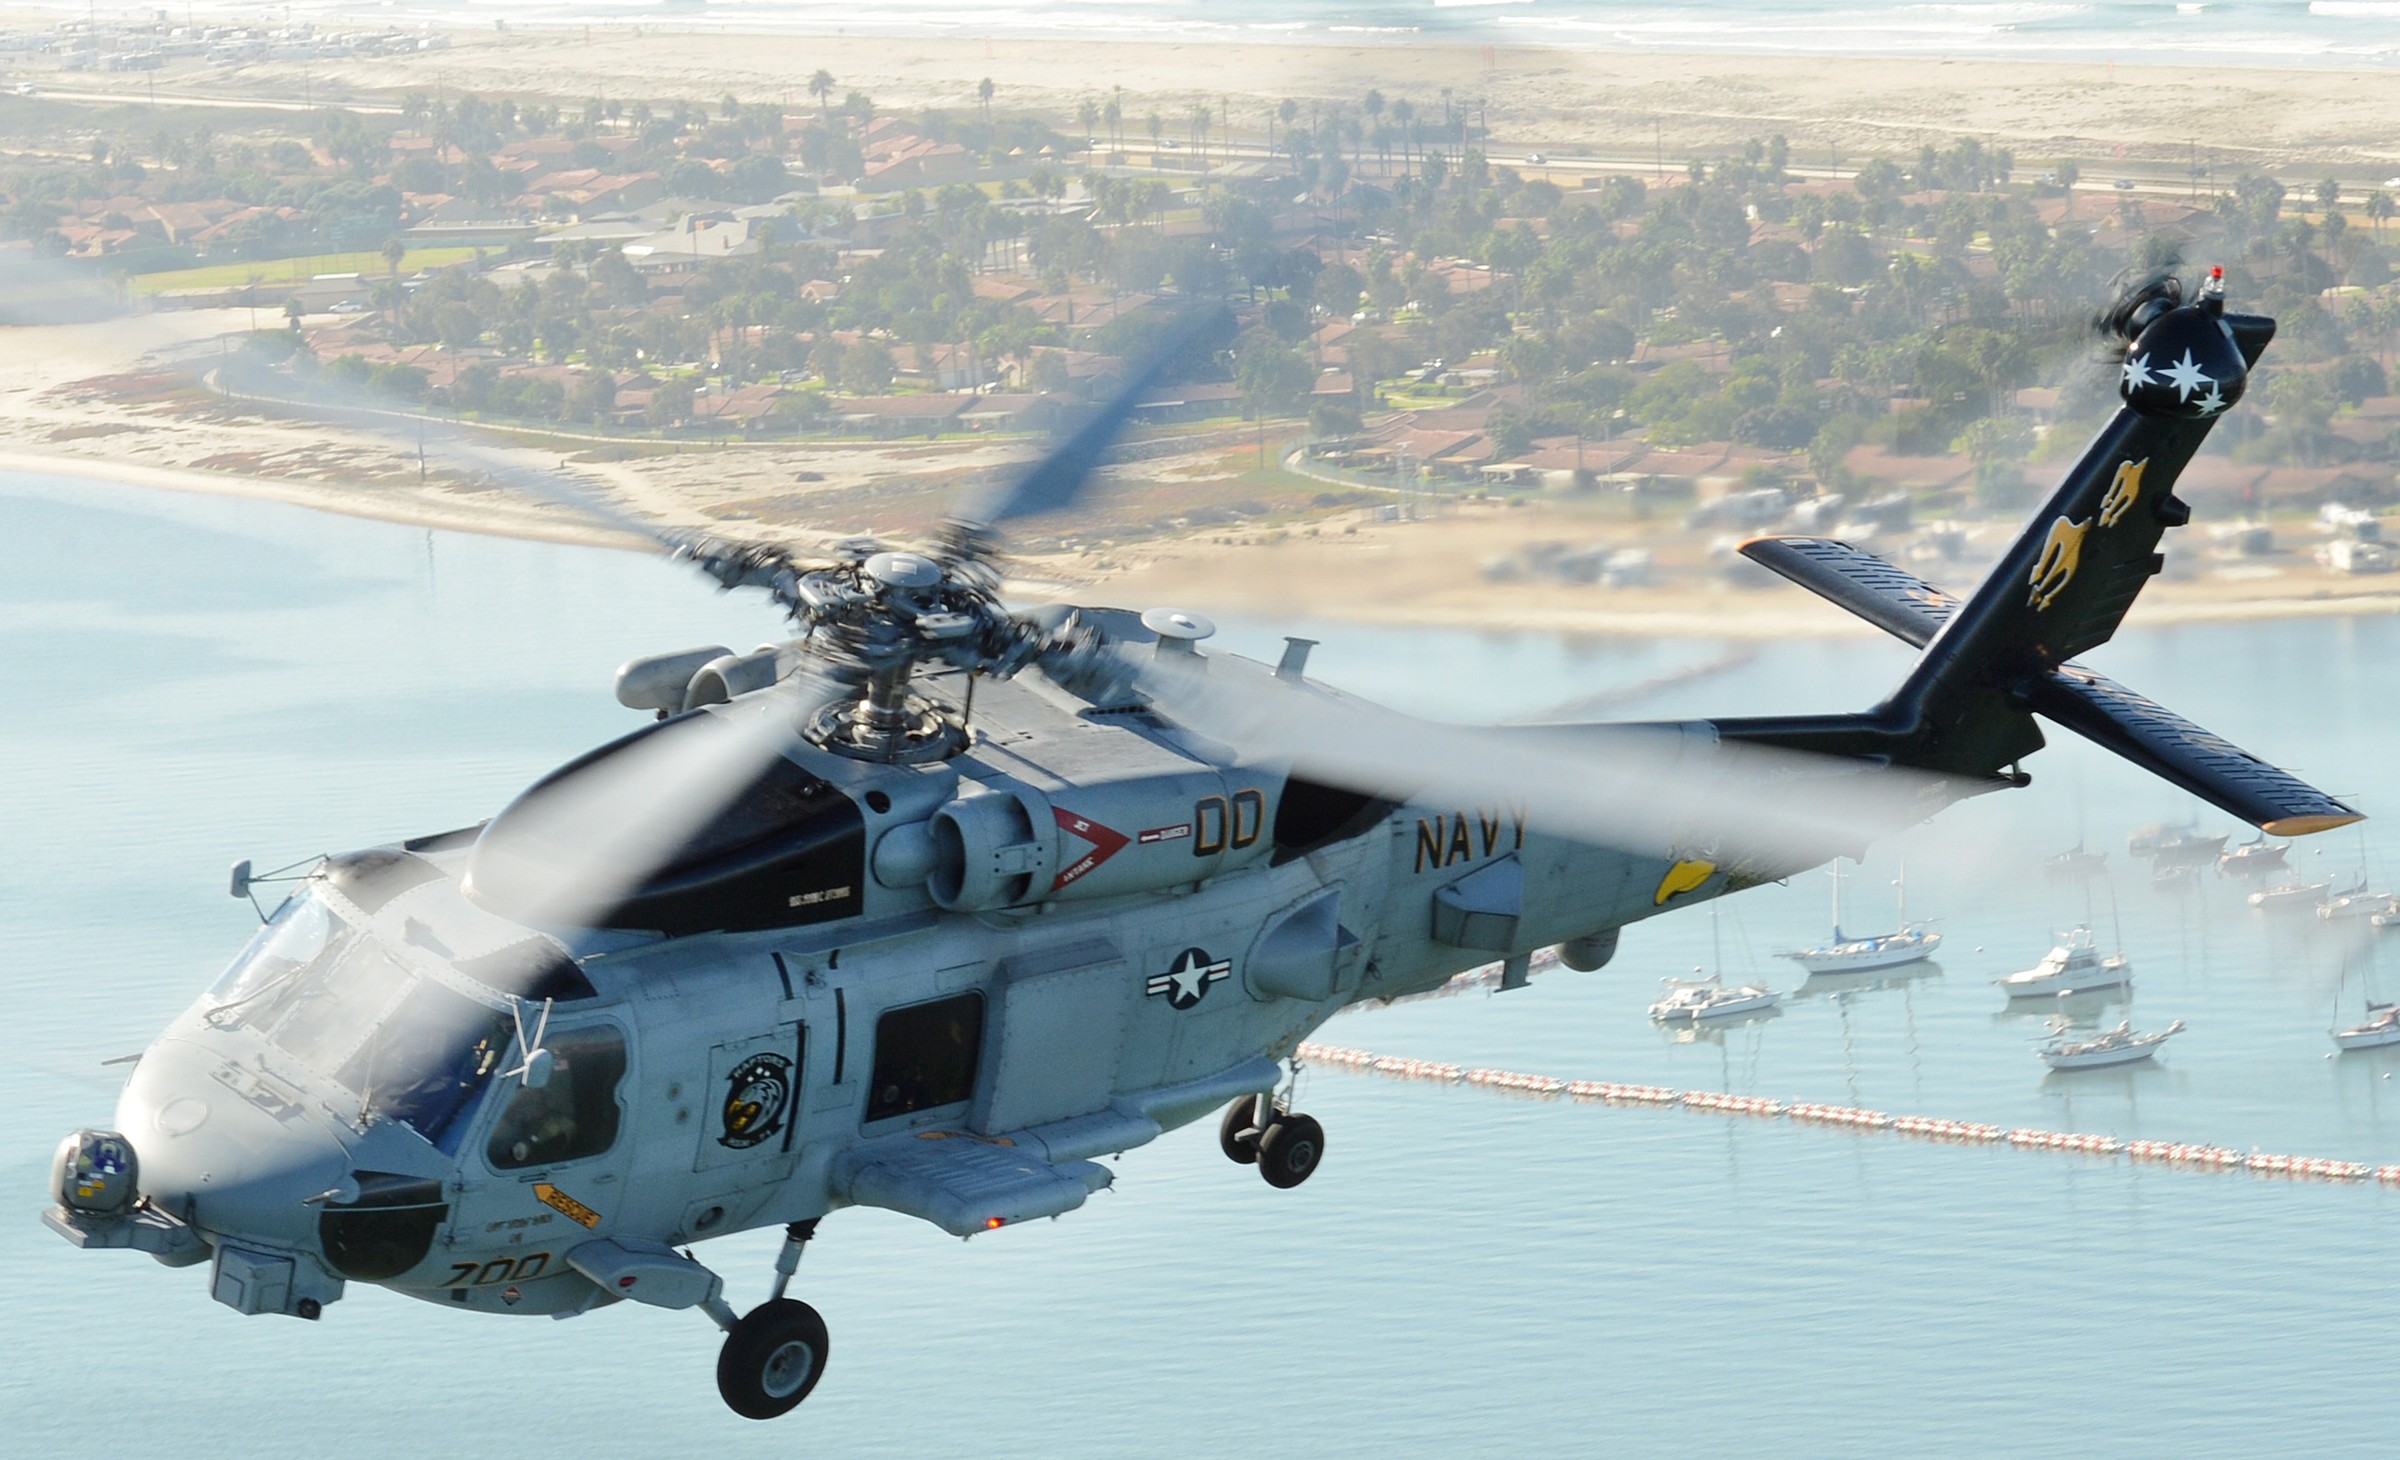 hsm-71 raptors helicopter maritime strike squadron mh-60r seahawk navy 2014 23